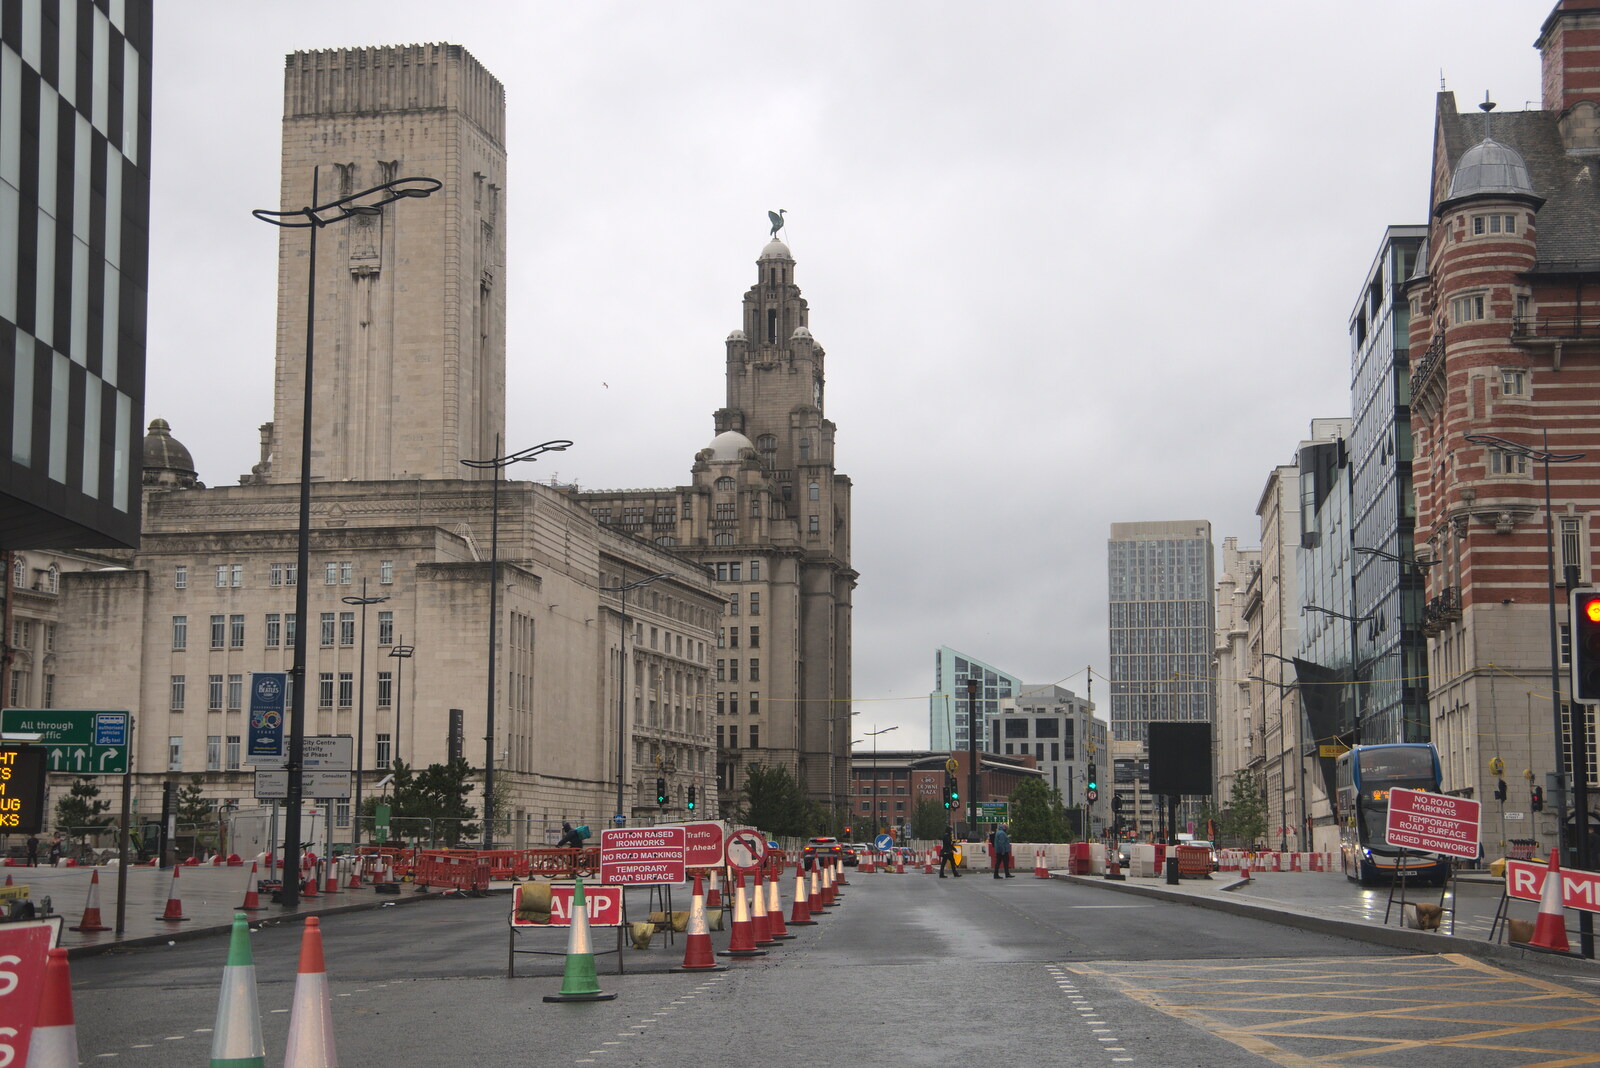 The Liver Building on The Strand from Pork Pies and Dockside Dereliction, Melton Mowbray and Liverpool - 7th August 2021